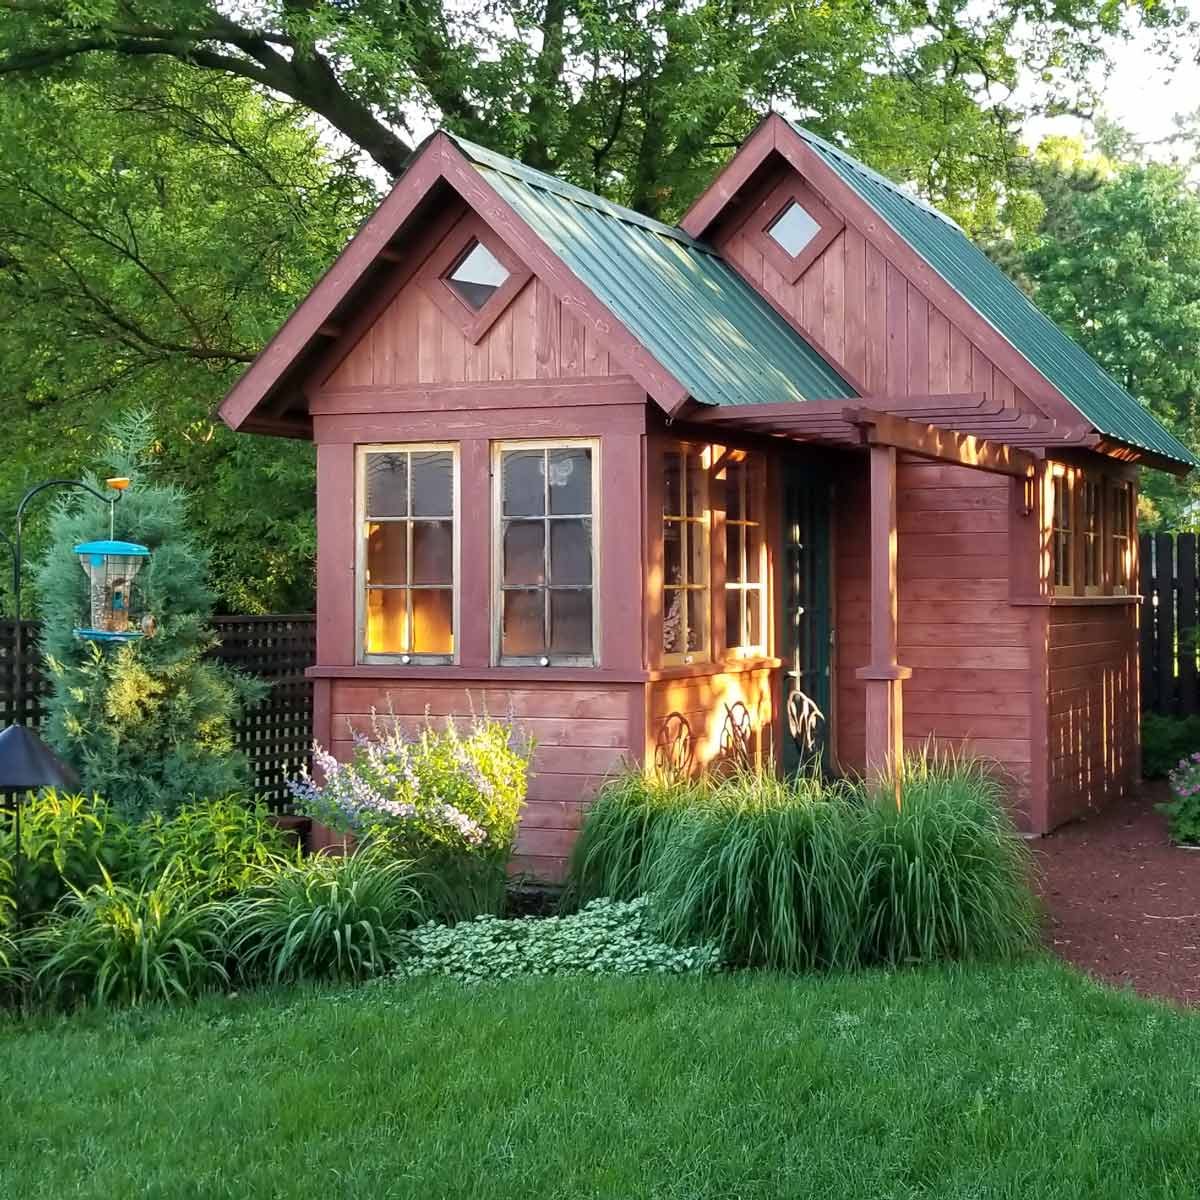 Tips and Methods for Adding Solar Power to a Shed